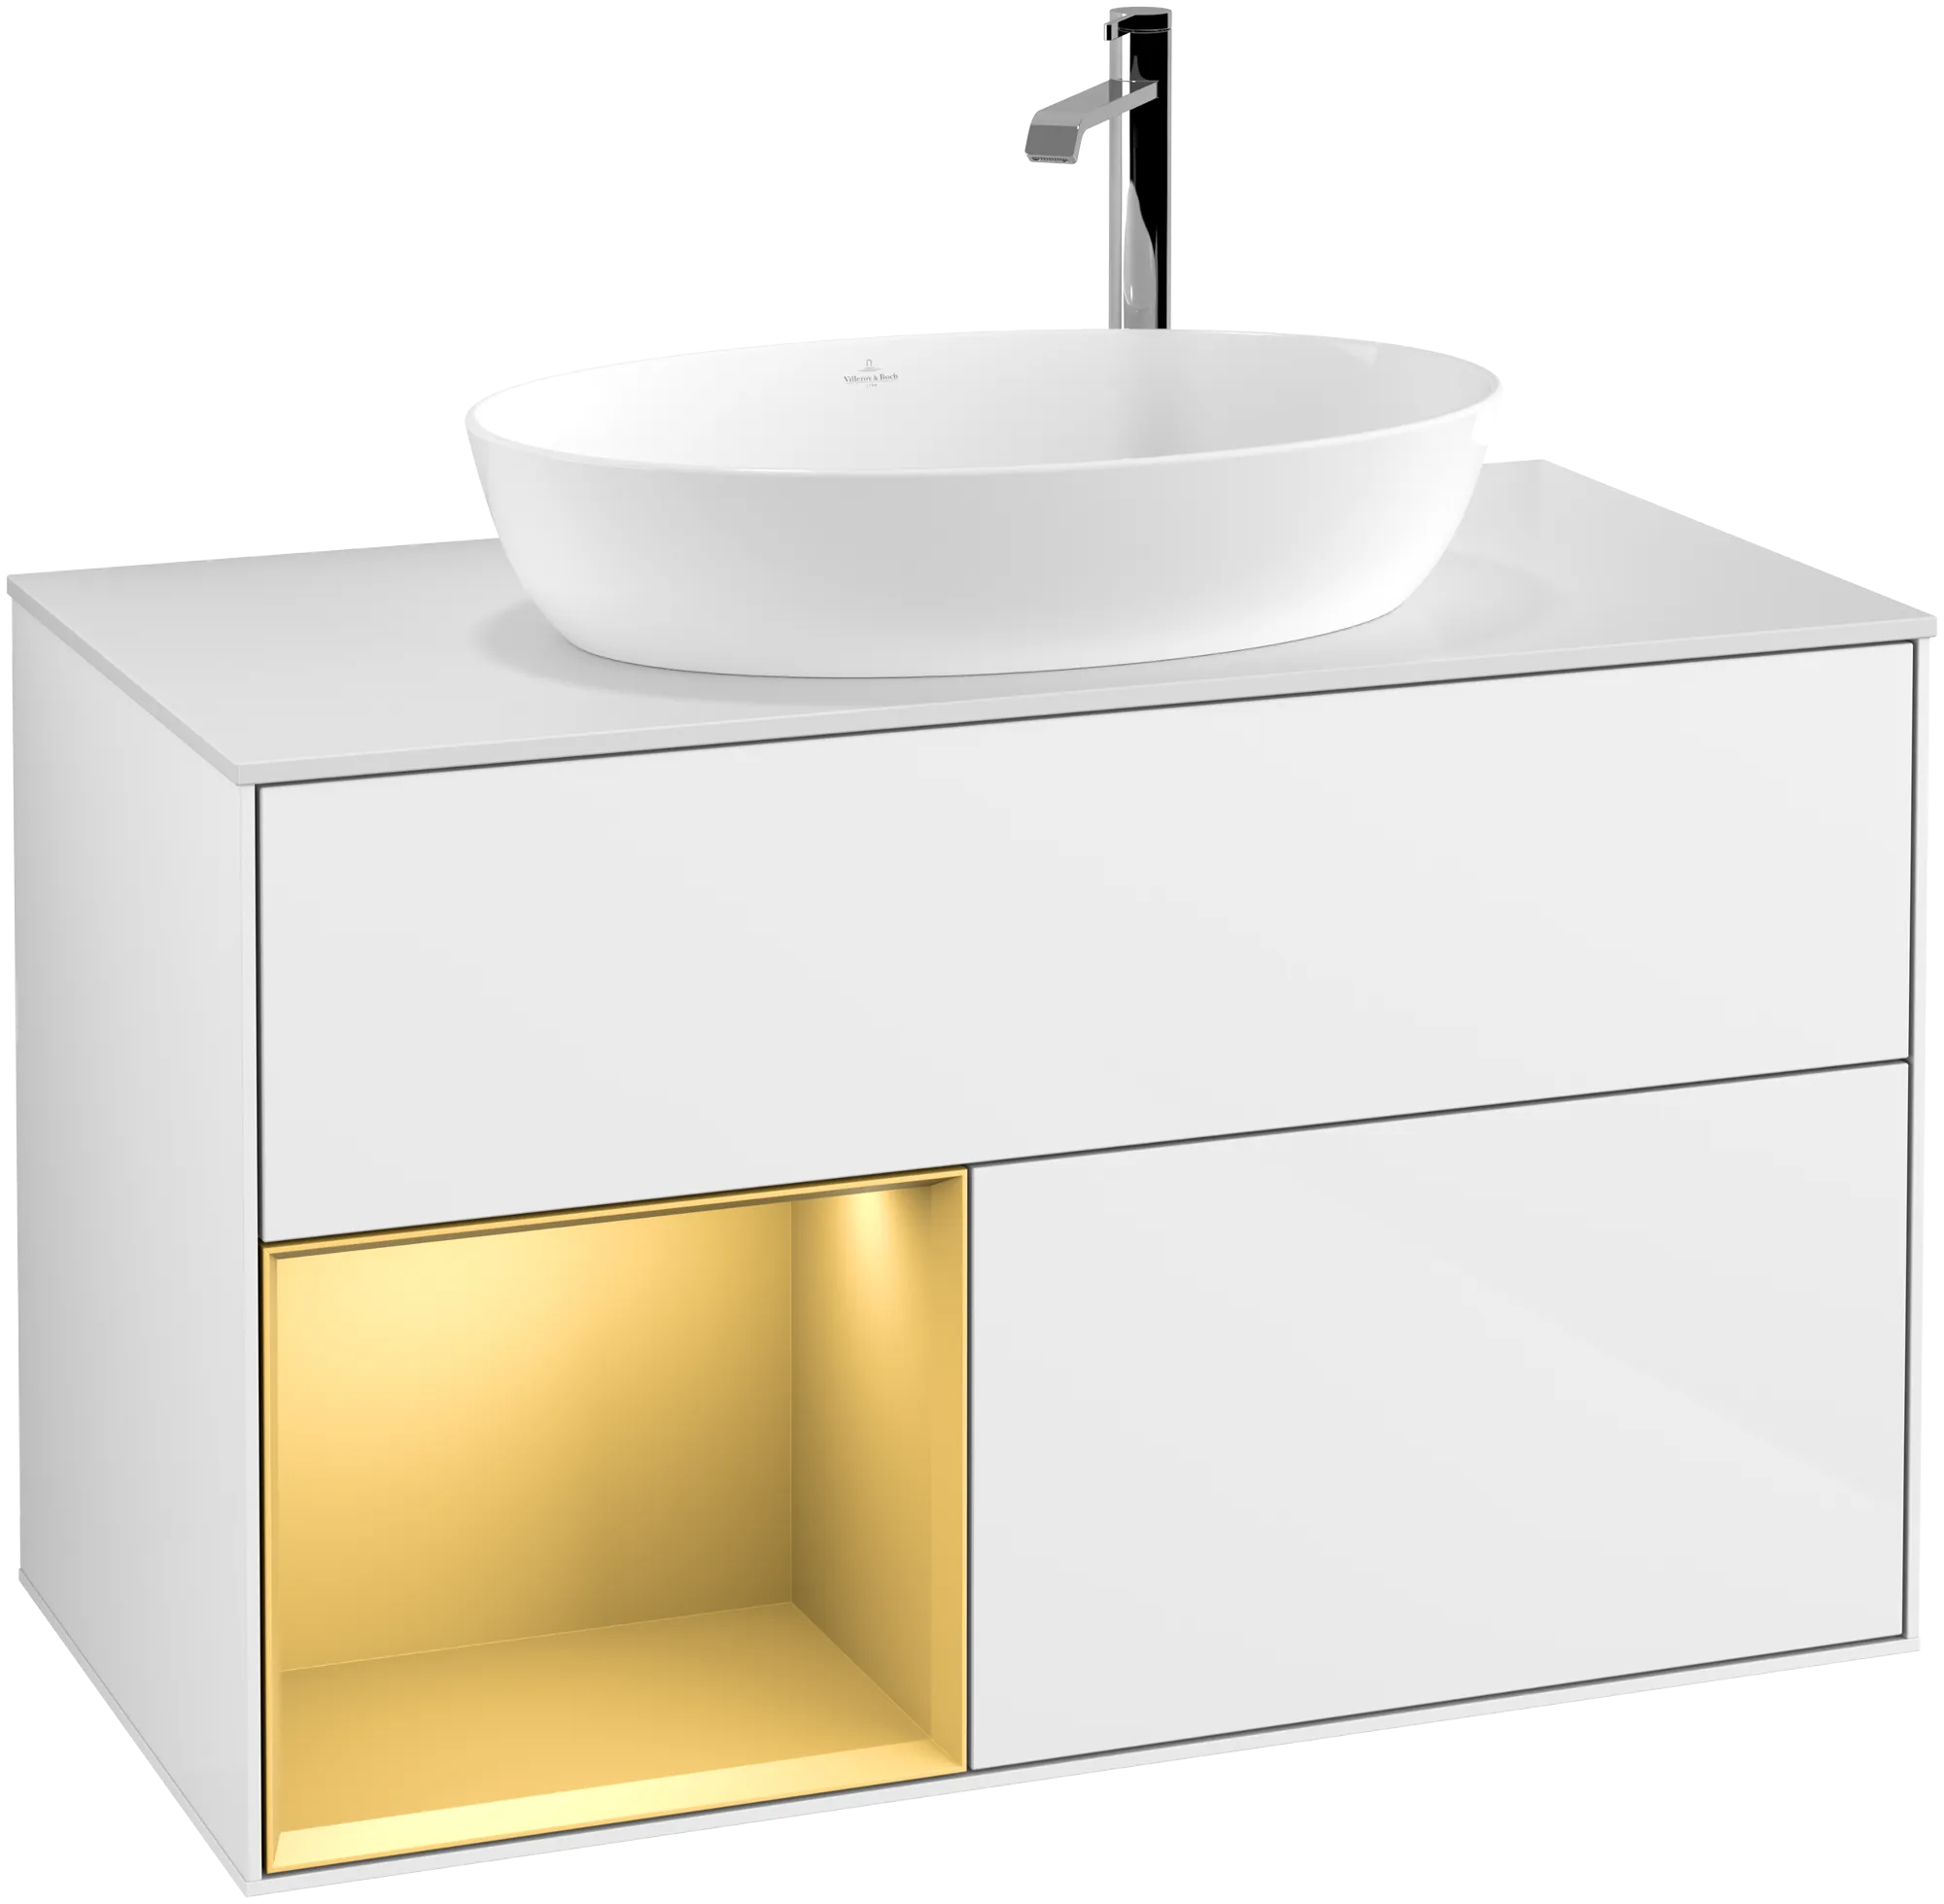 Picture of VILLEROY BOCH Finion Vanity unit, with lighting, 2 pull-out compartments, 1000 x 603 x 501 mm, Glossy White Lacquer / Gold Matt Lacquer / Glass White Matt #G891HFGF